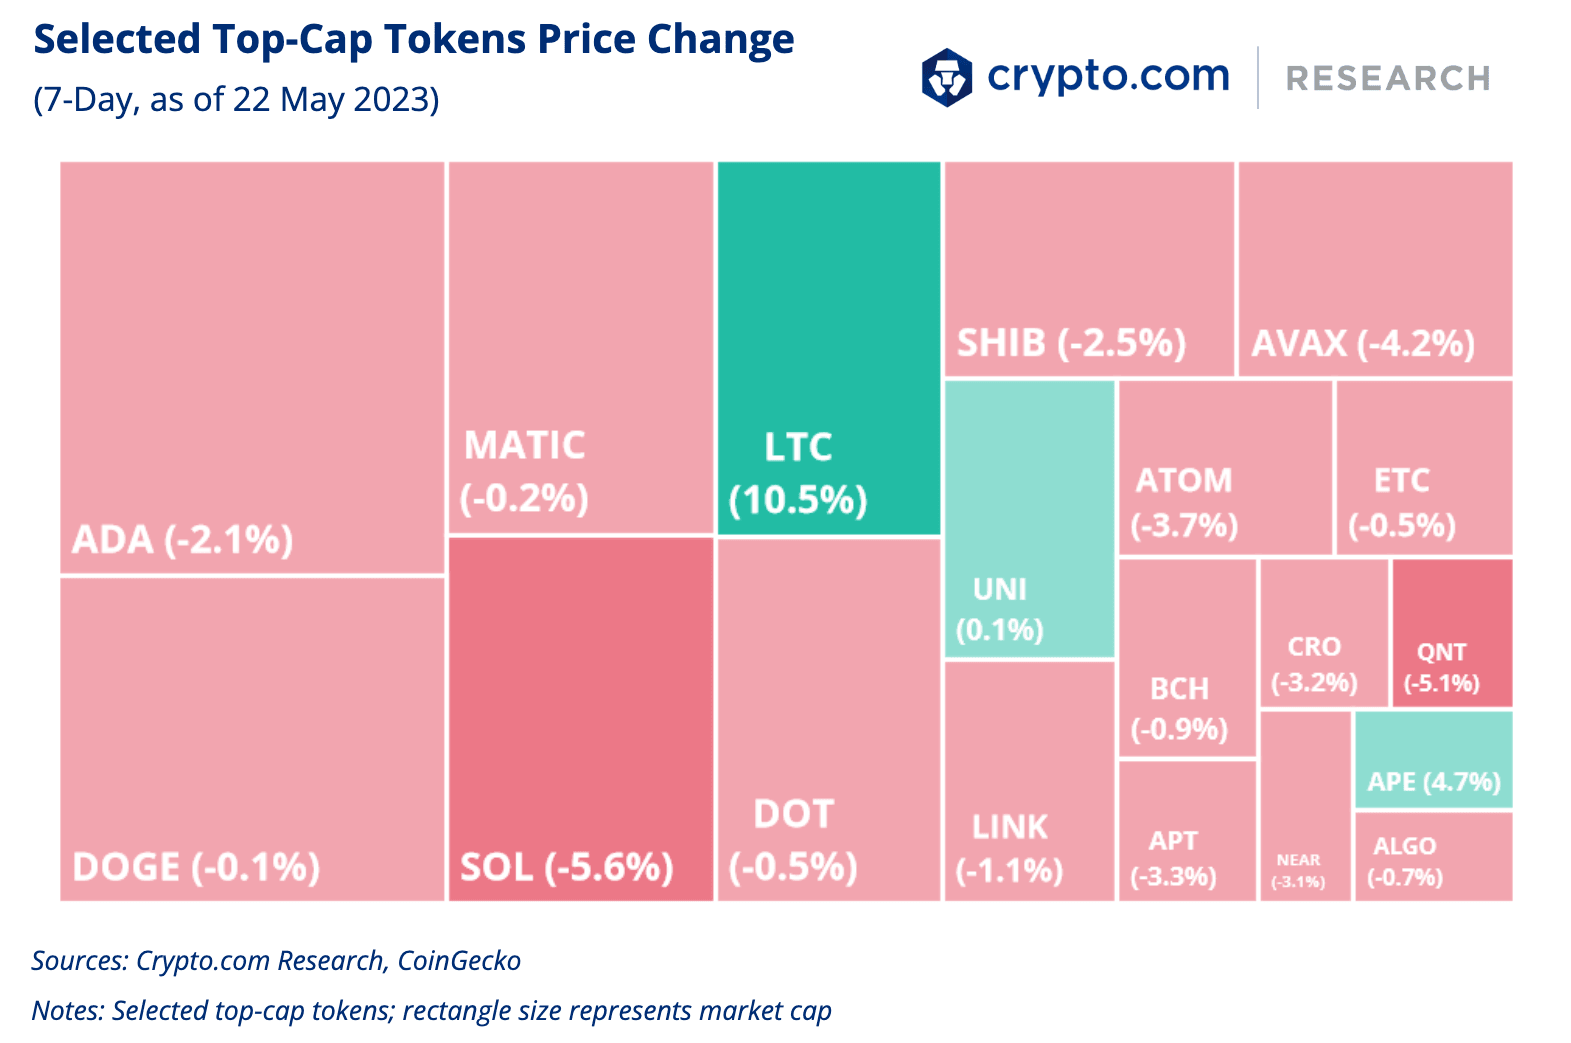 Selected Top-Cap Tokens Price Change 22 May